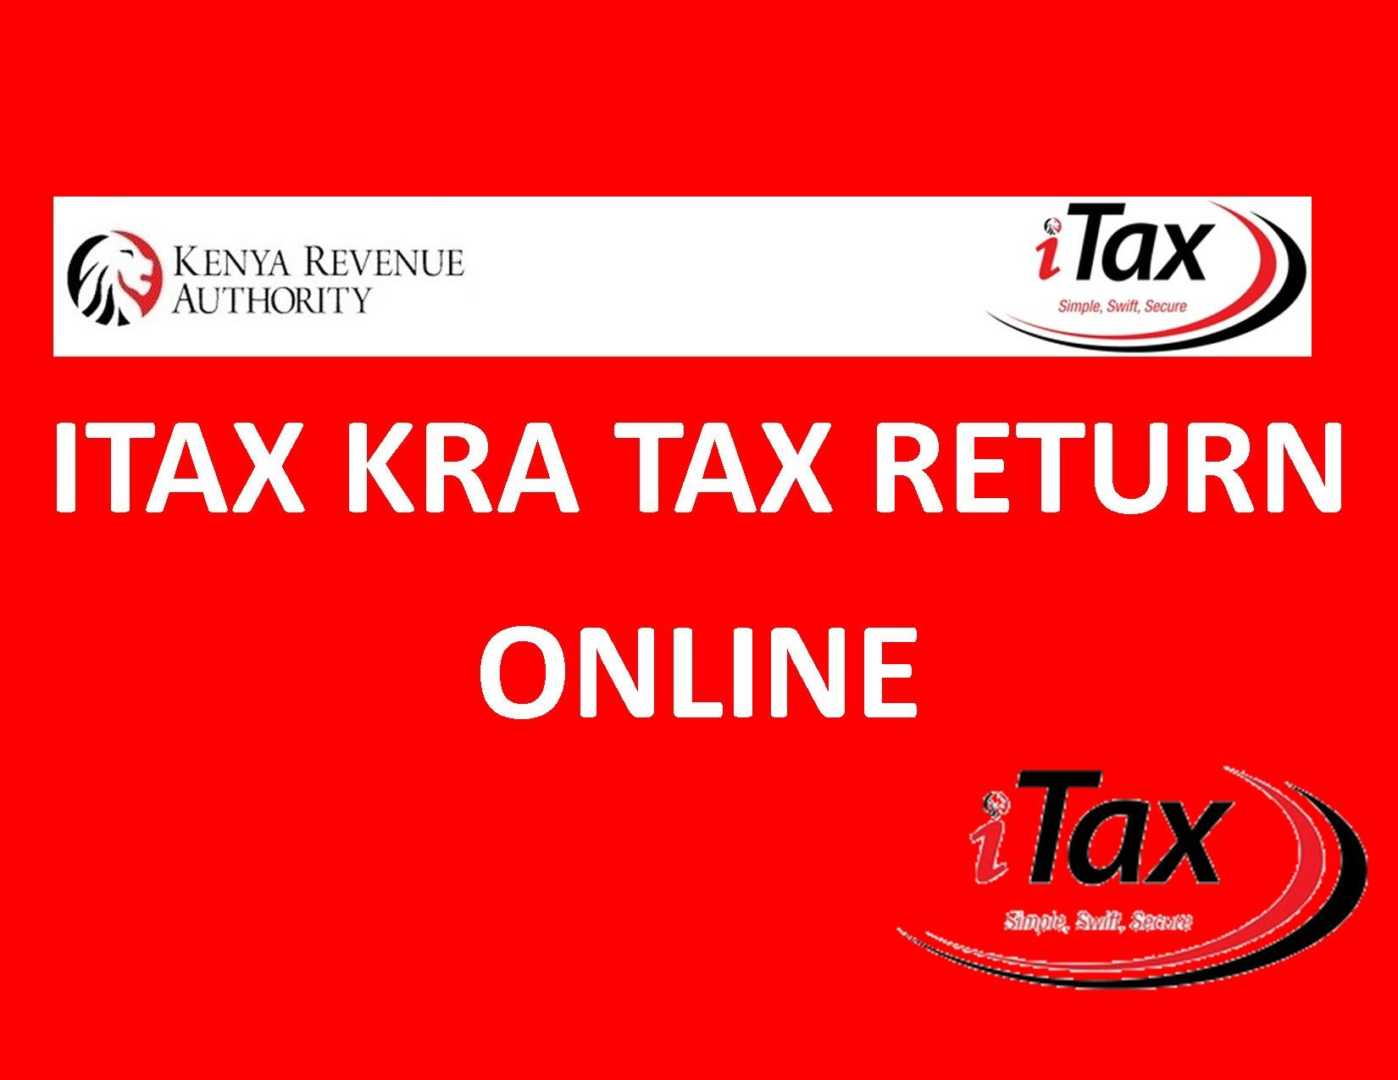 How to file KRA tax returns online on iTax